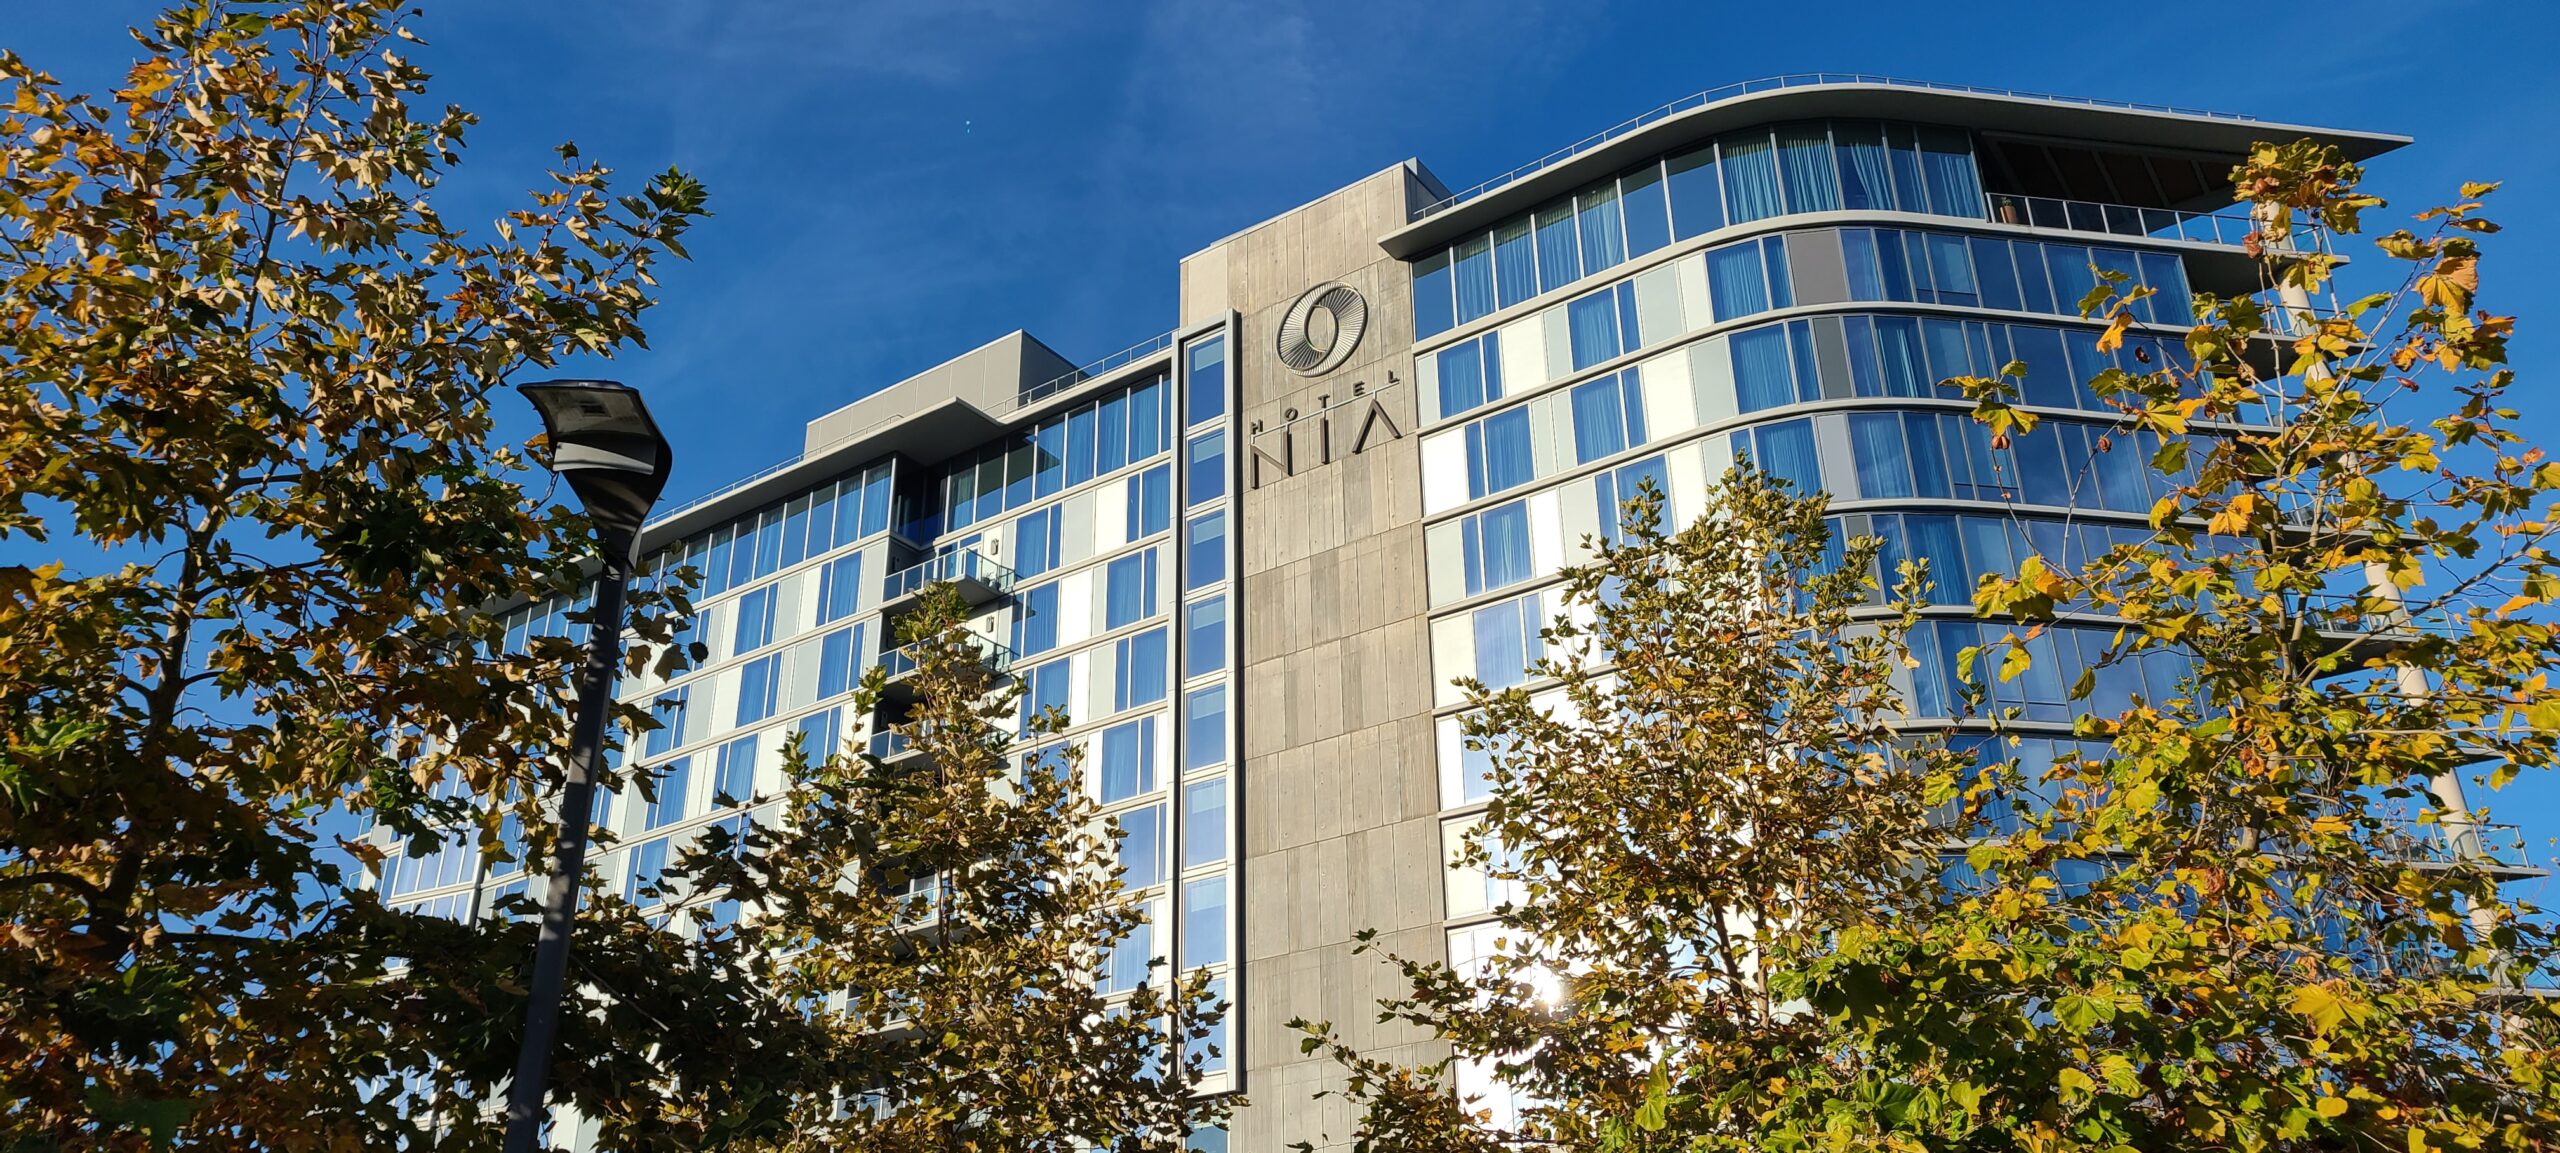 Hotel Nia Autograph Collection